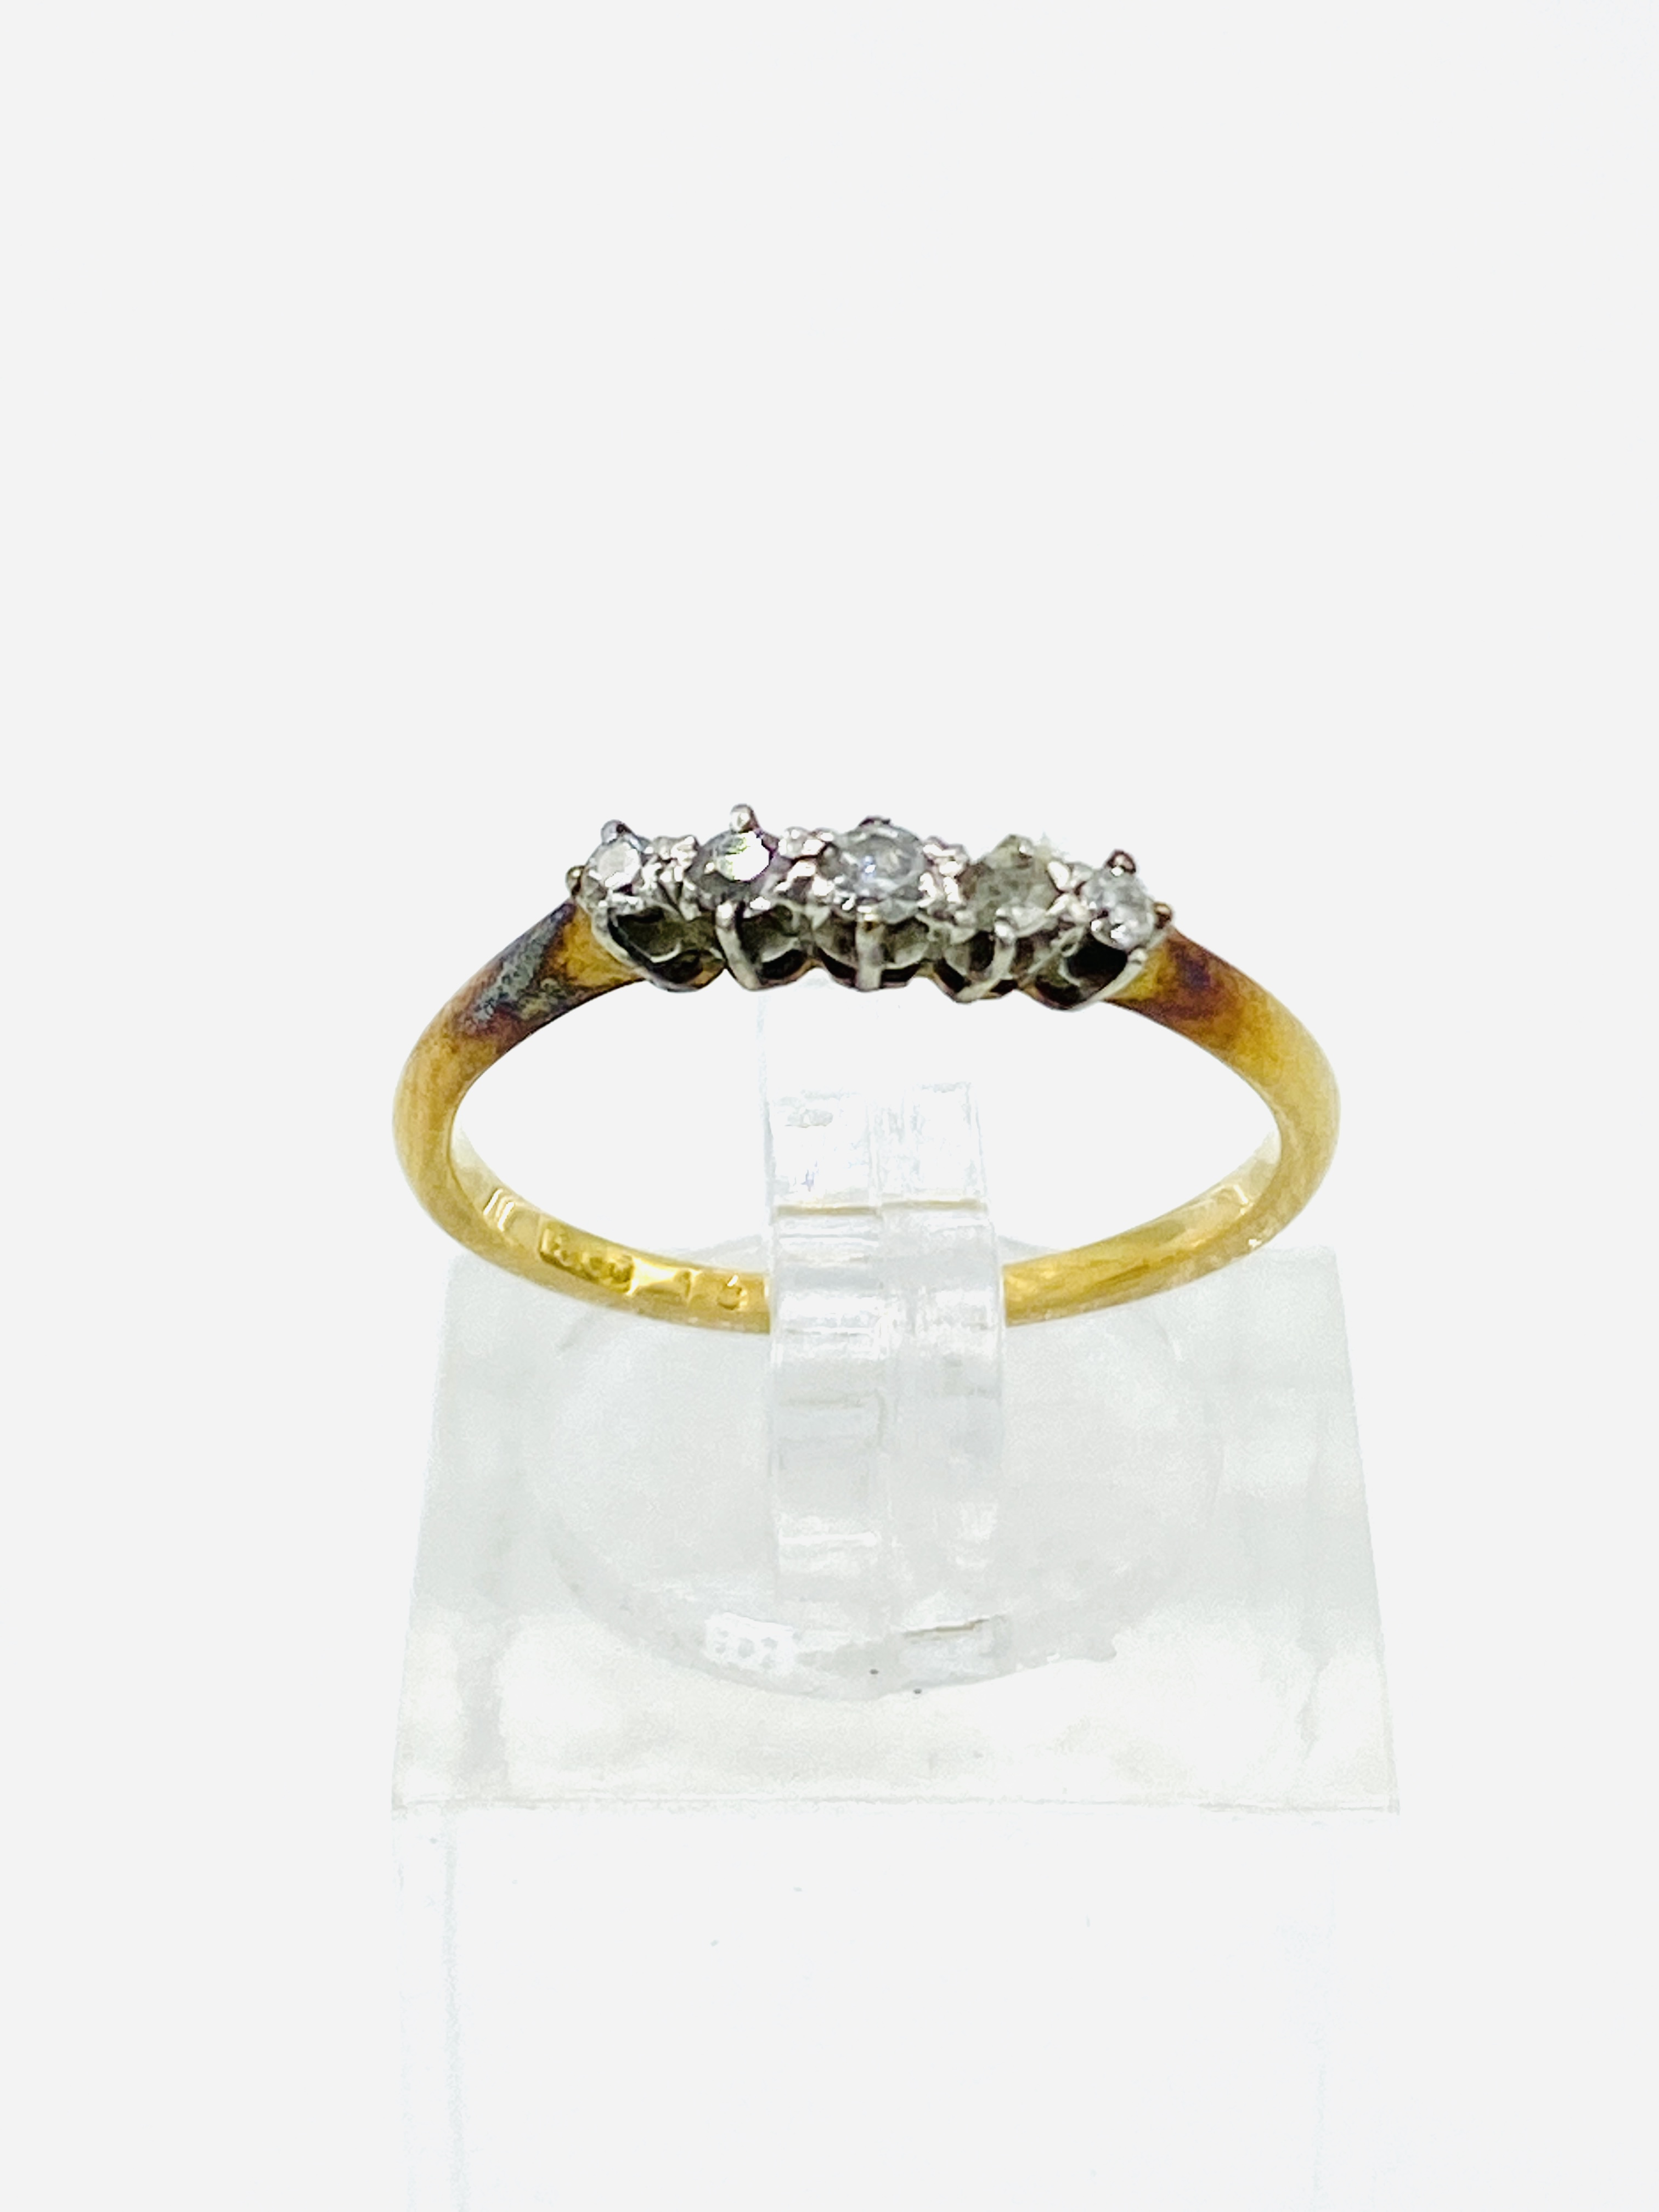 18ct gold and diamond ring - Image 4 of 6